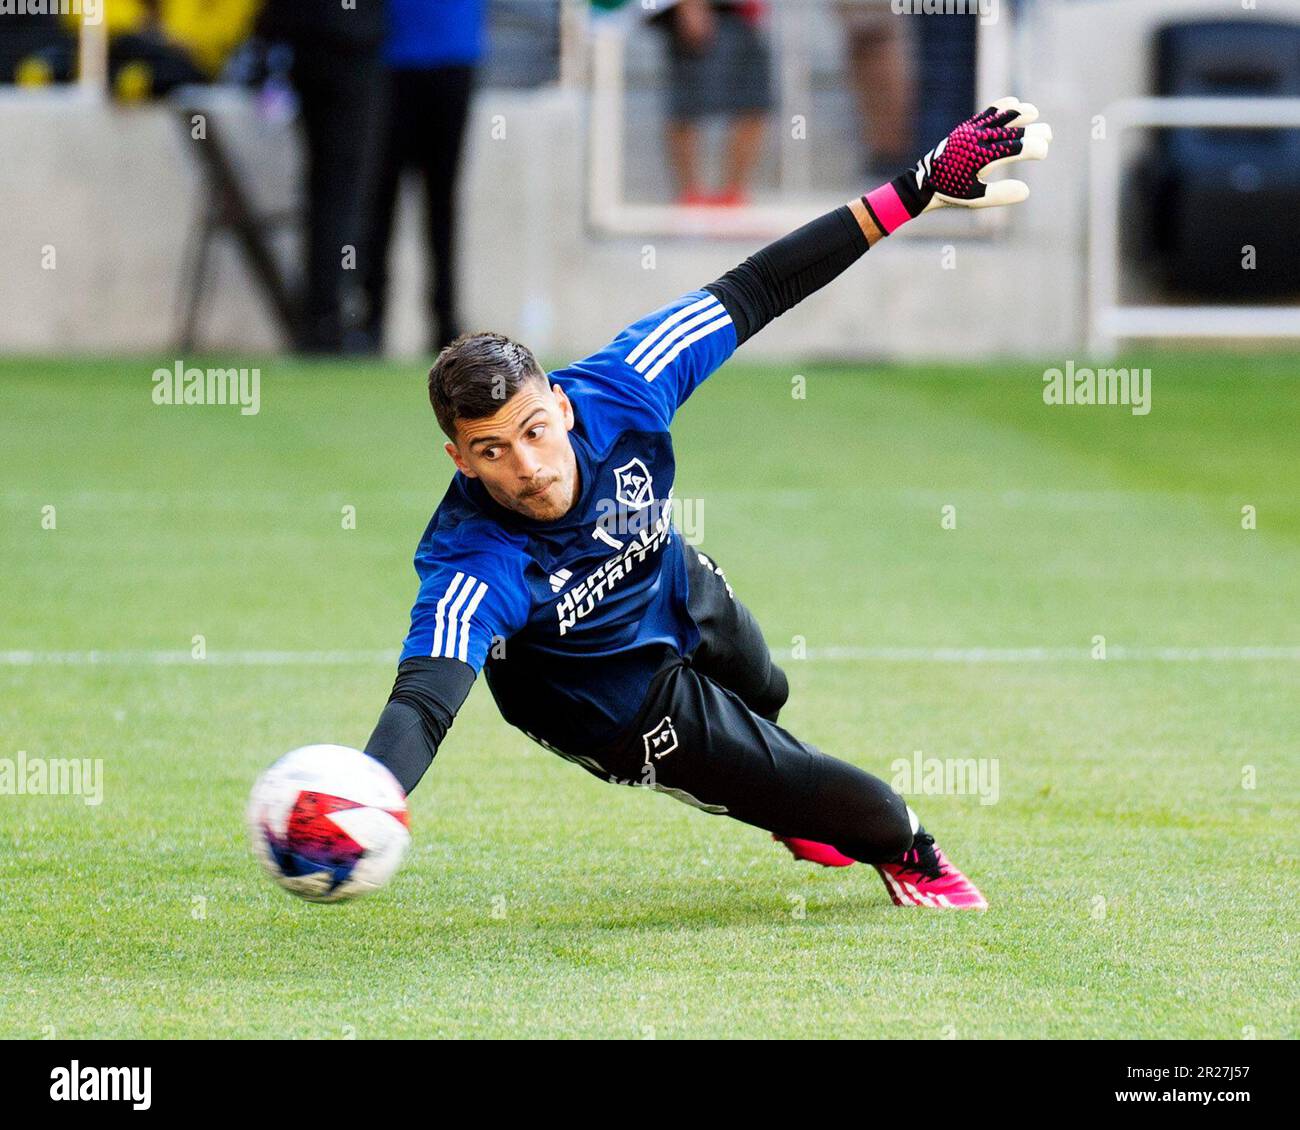 Photo Gallery: Your first look at the 2019 LA Galaxy goalkeeper